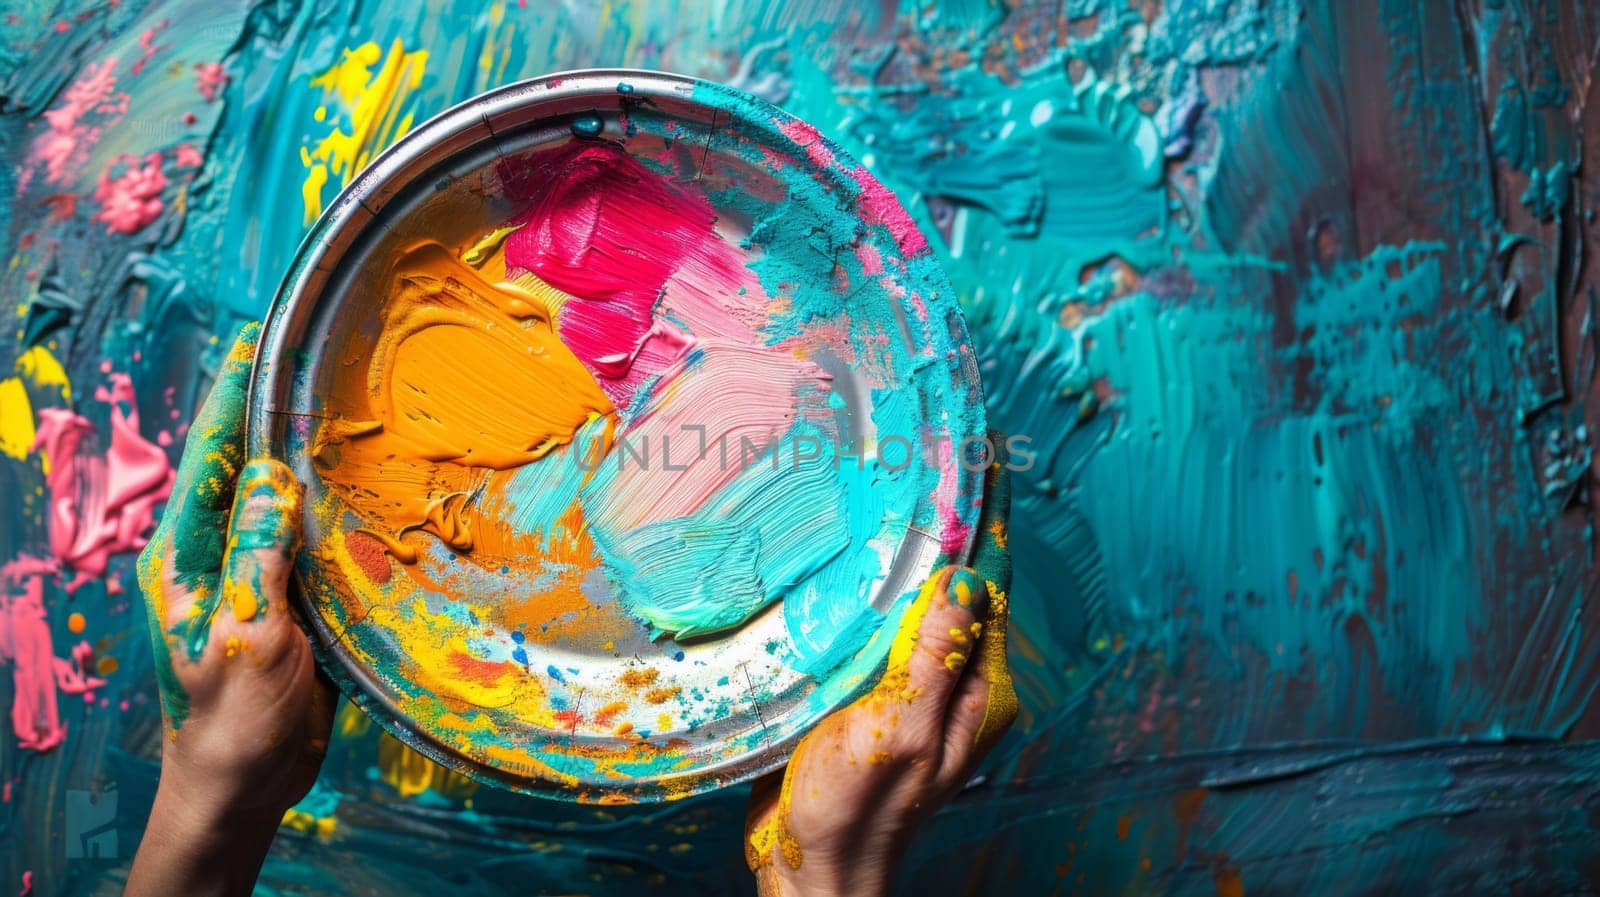 A person holding a paint brush in their hands with some colorful paints